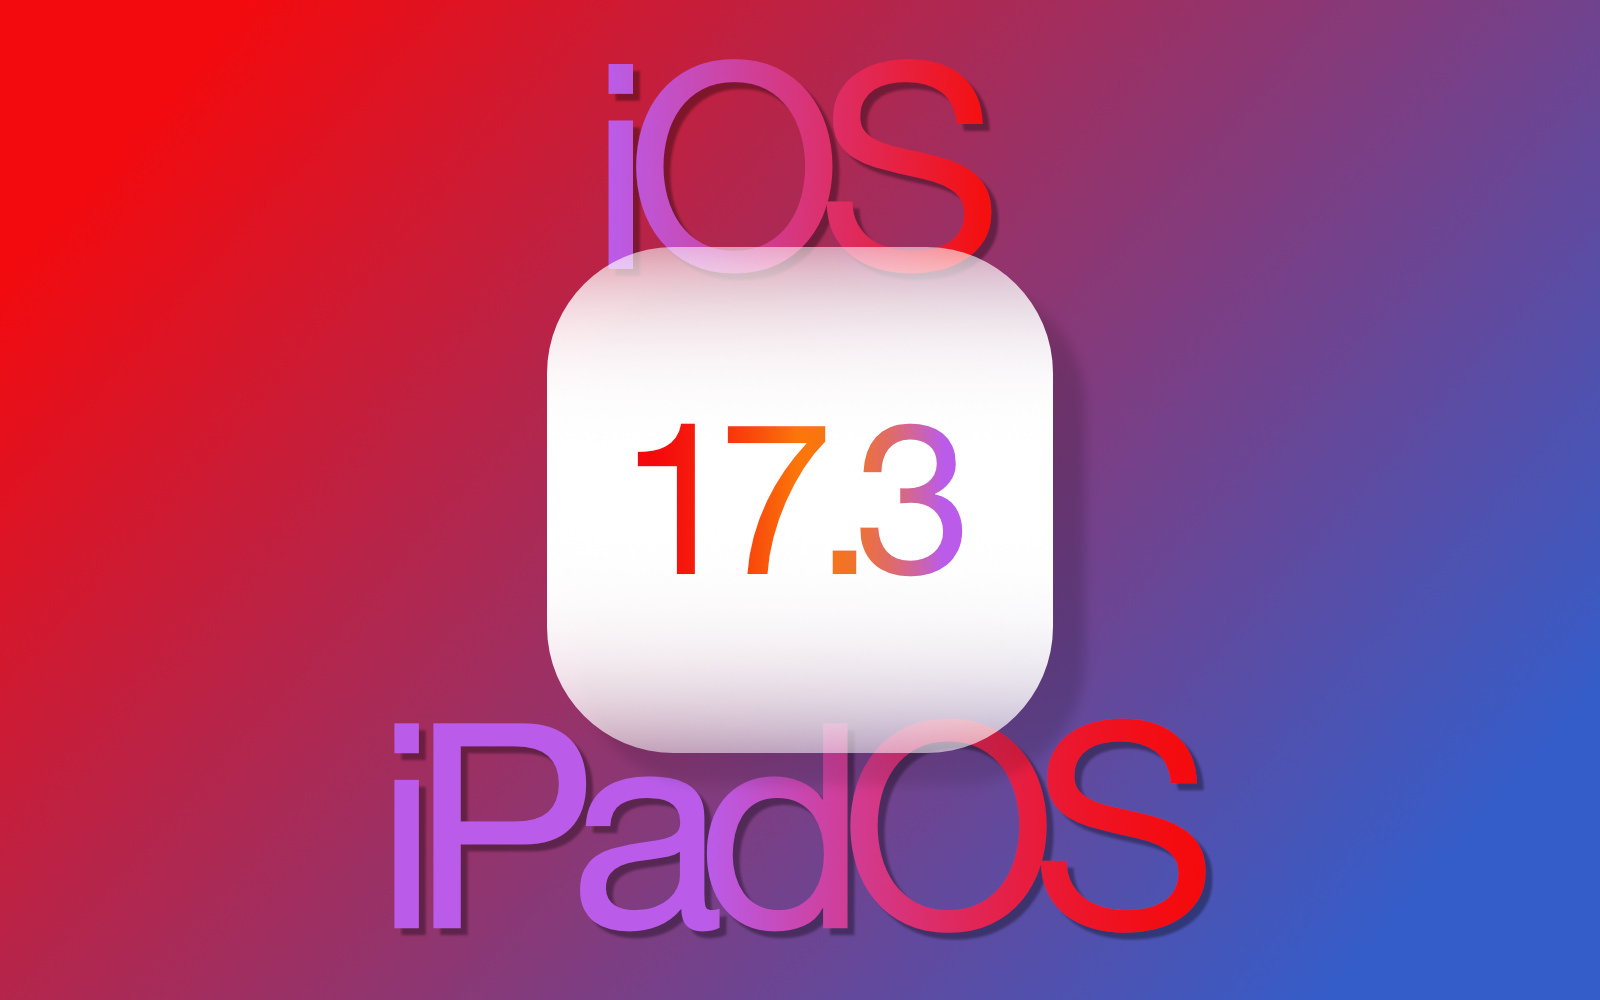 IOS17 3 official release